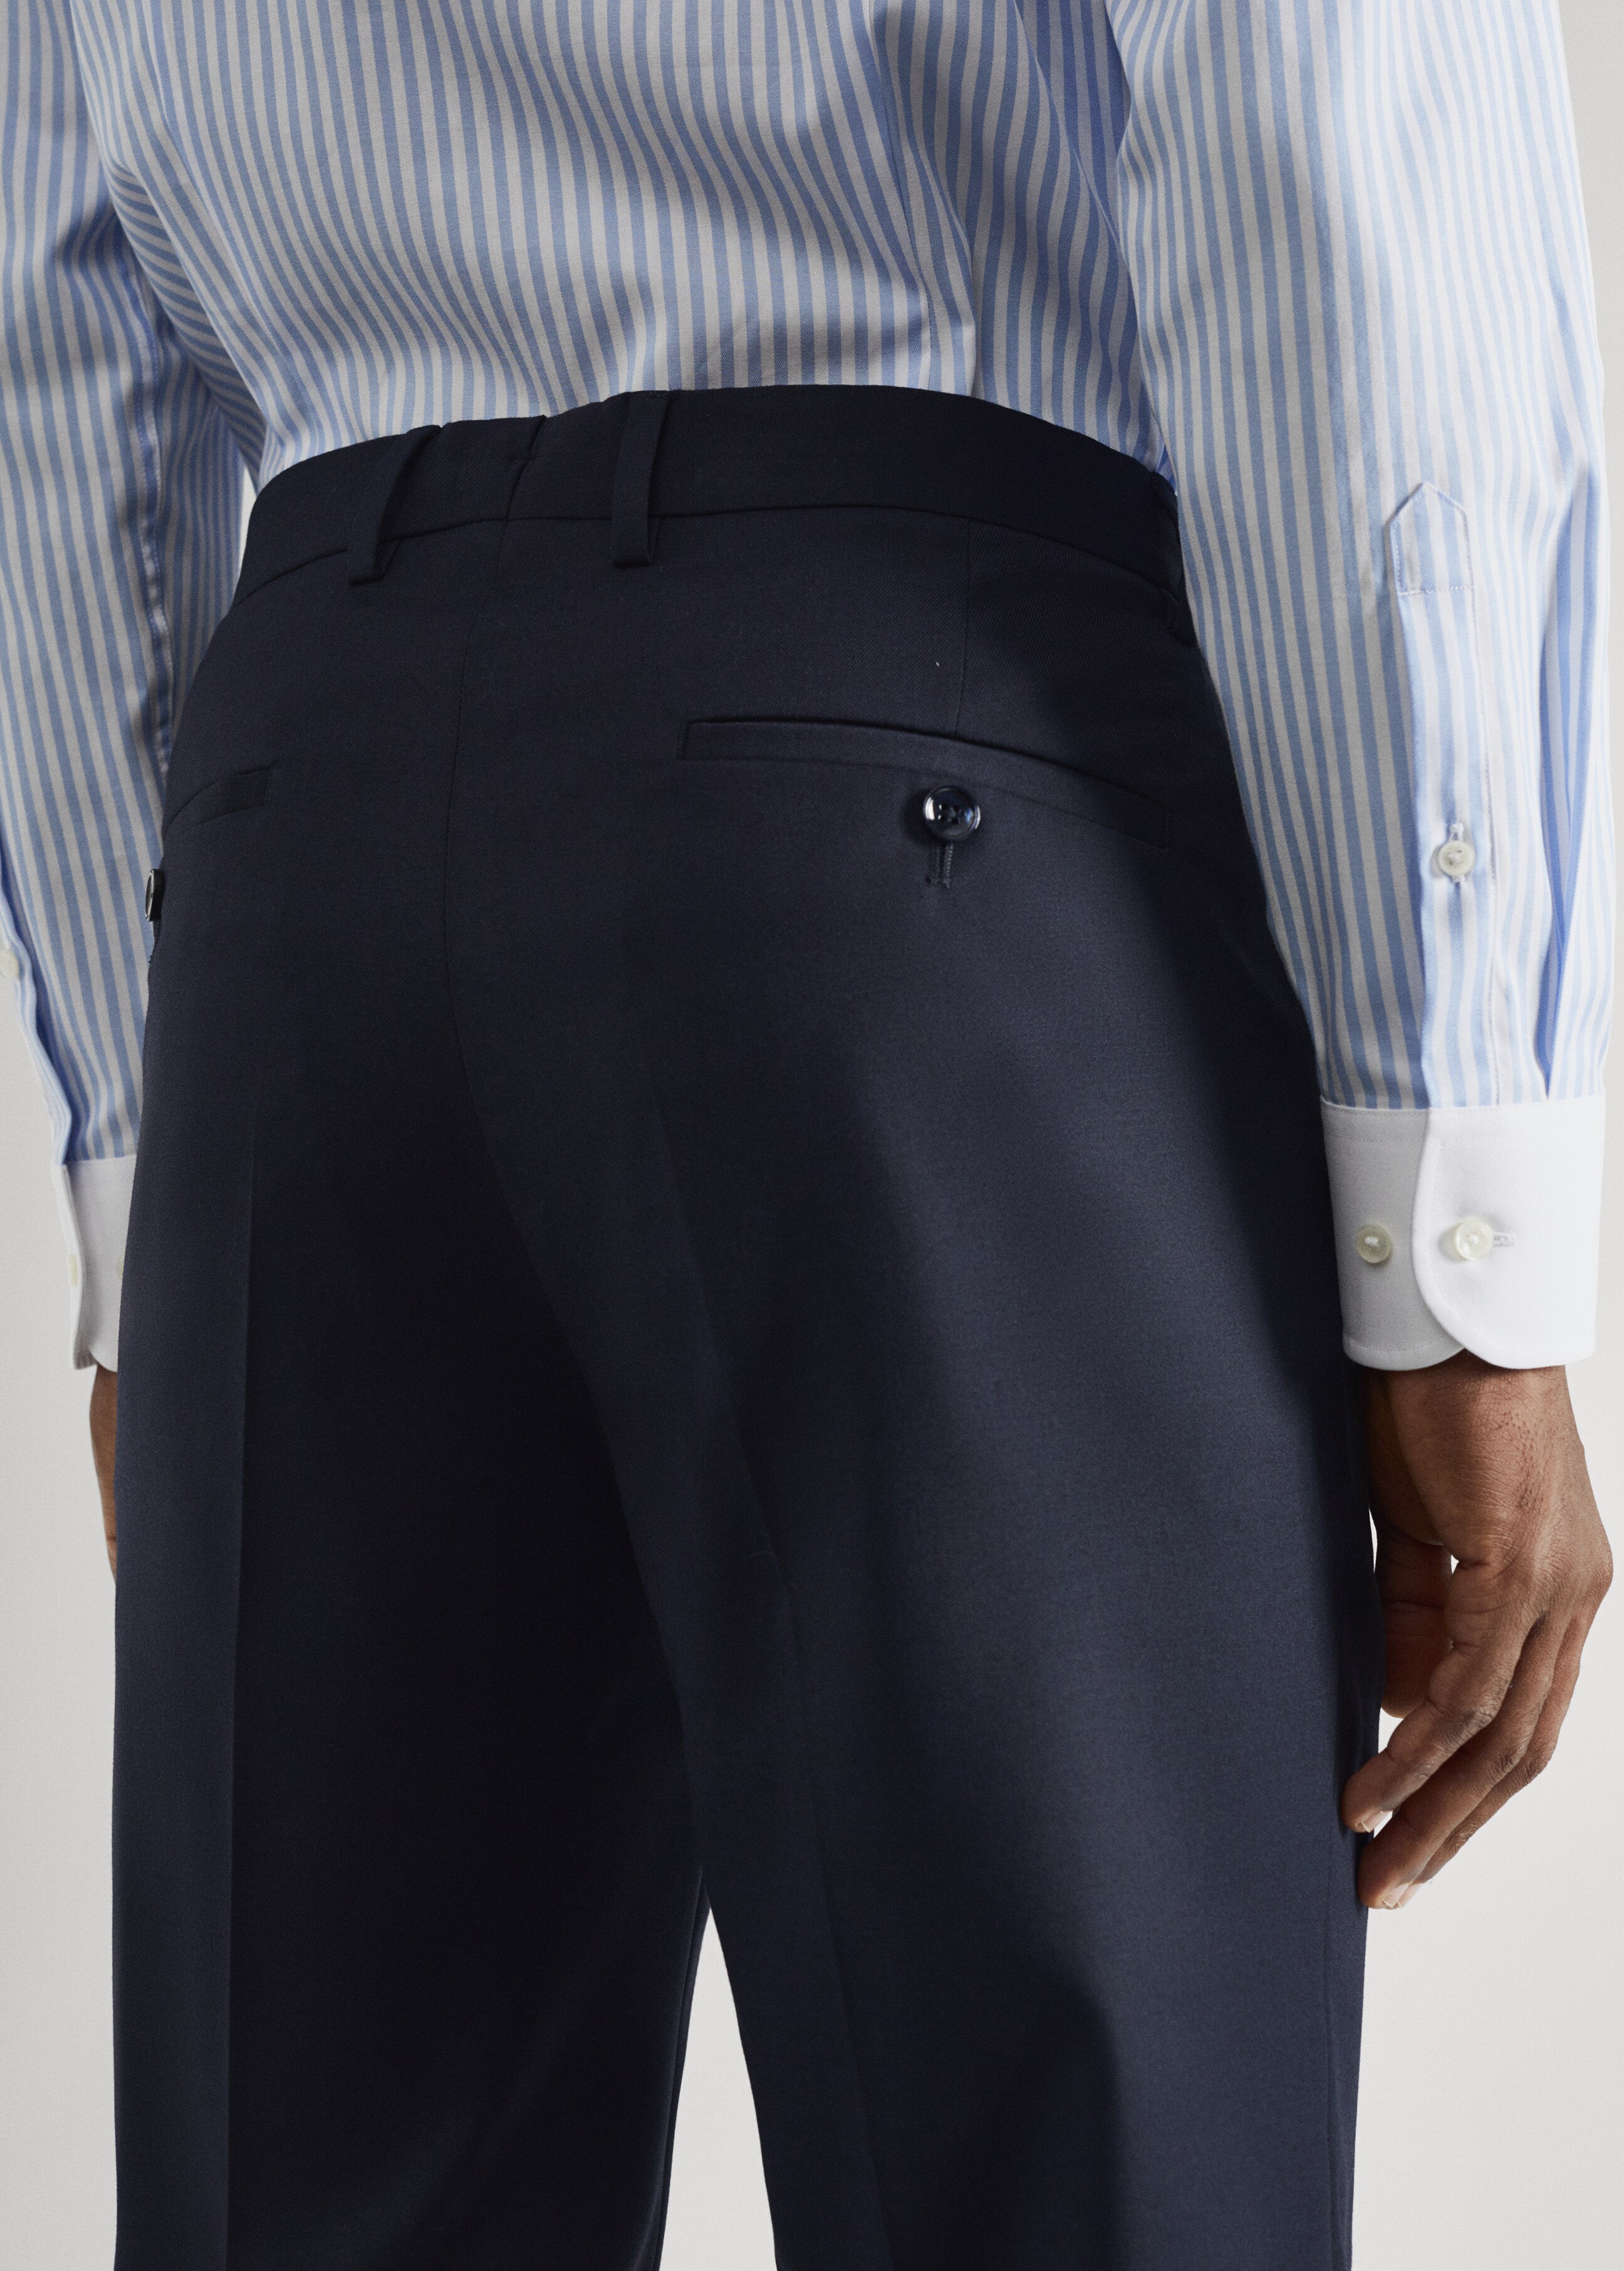  Suit trousers - Details of the article 6